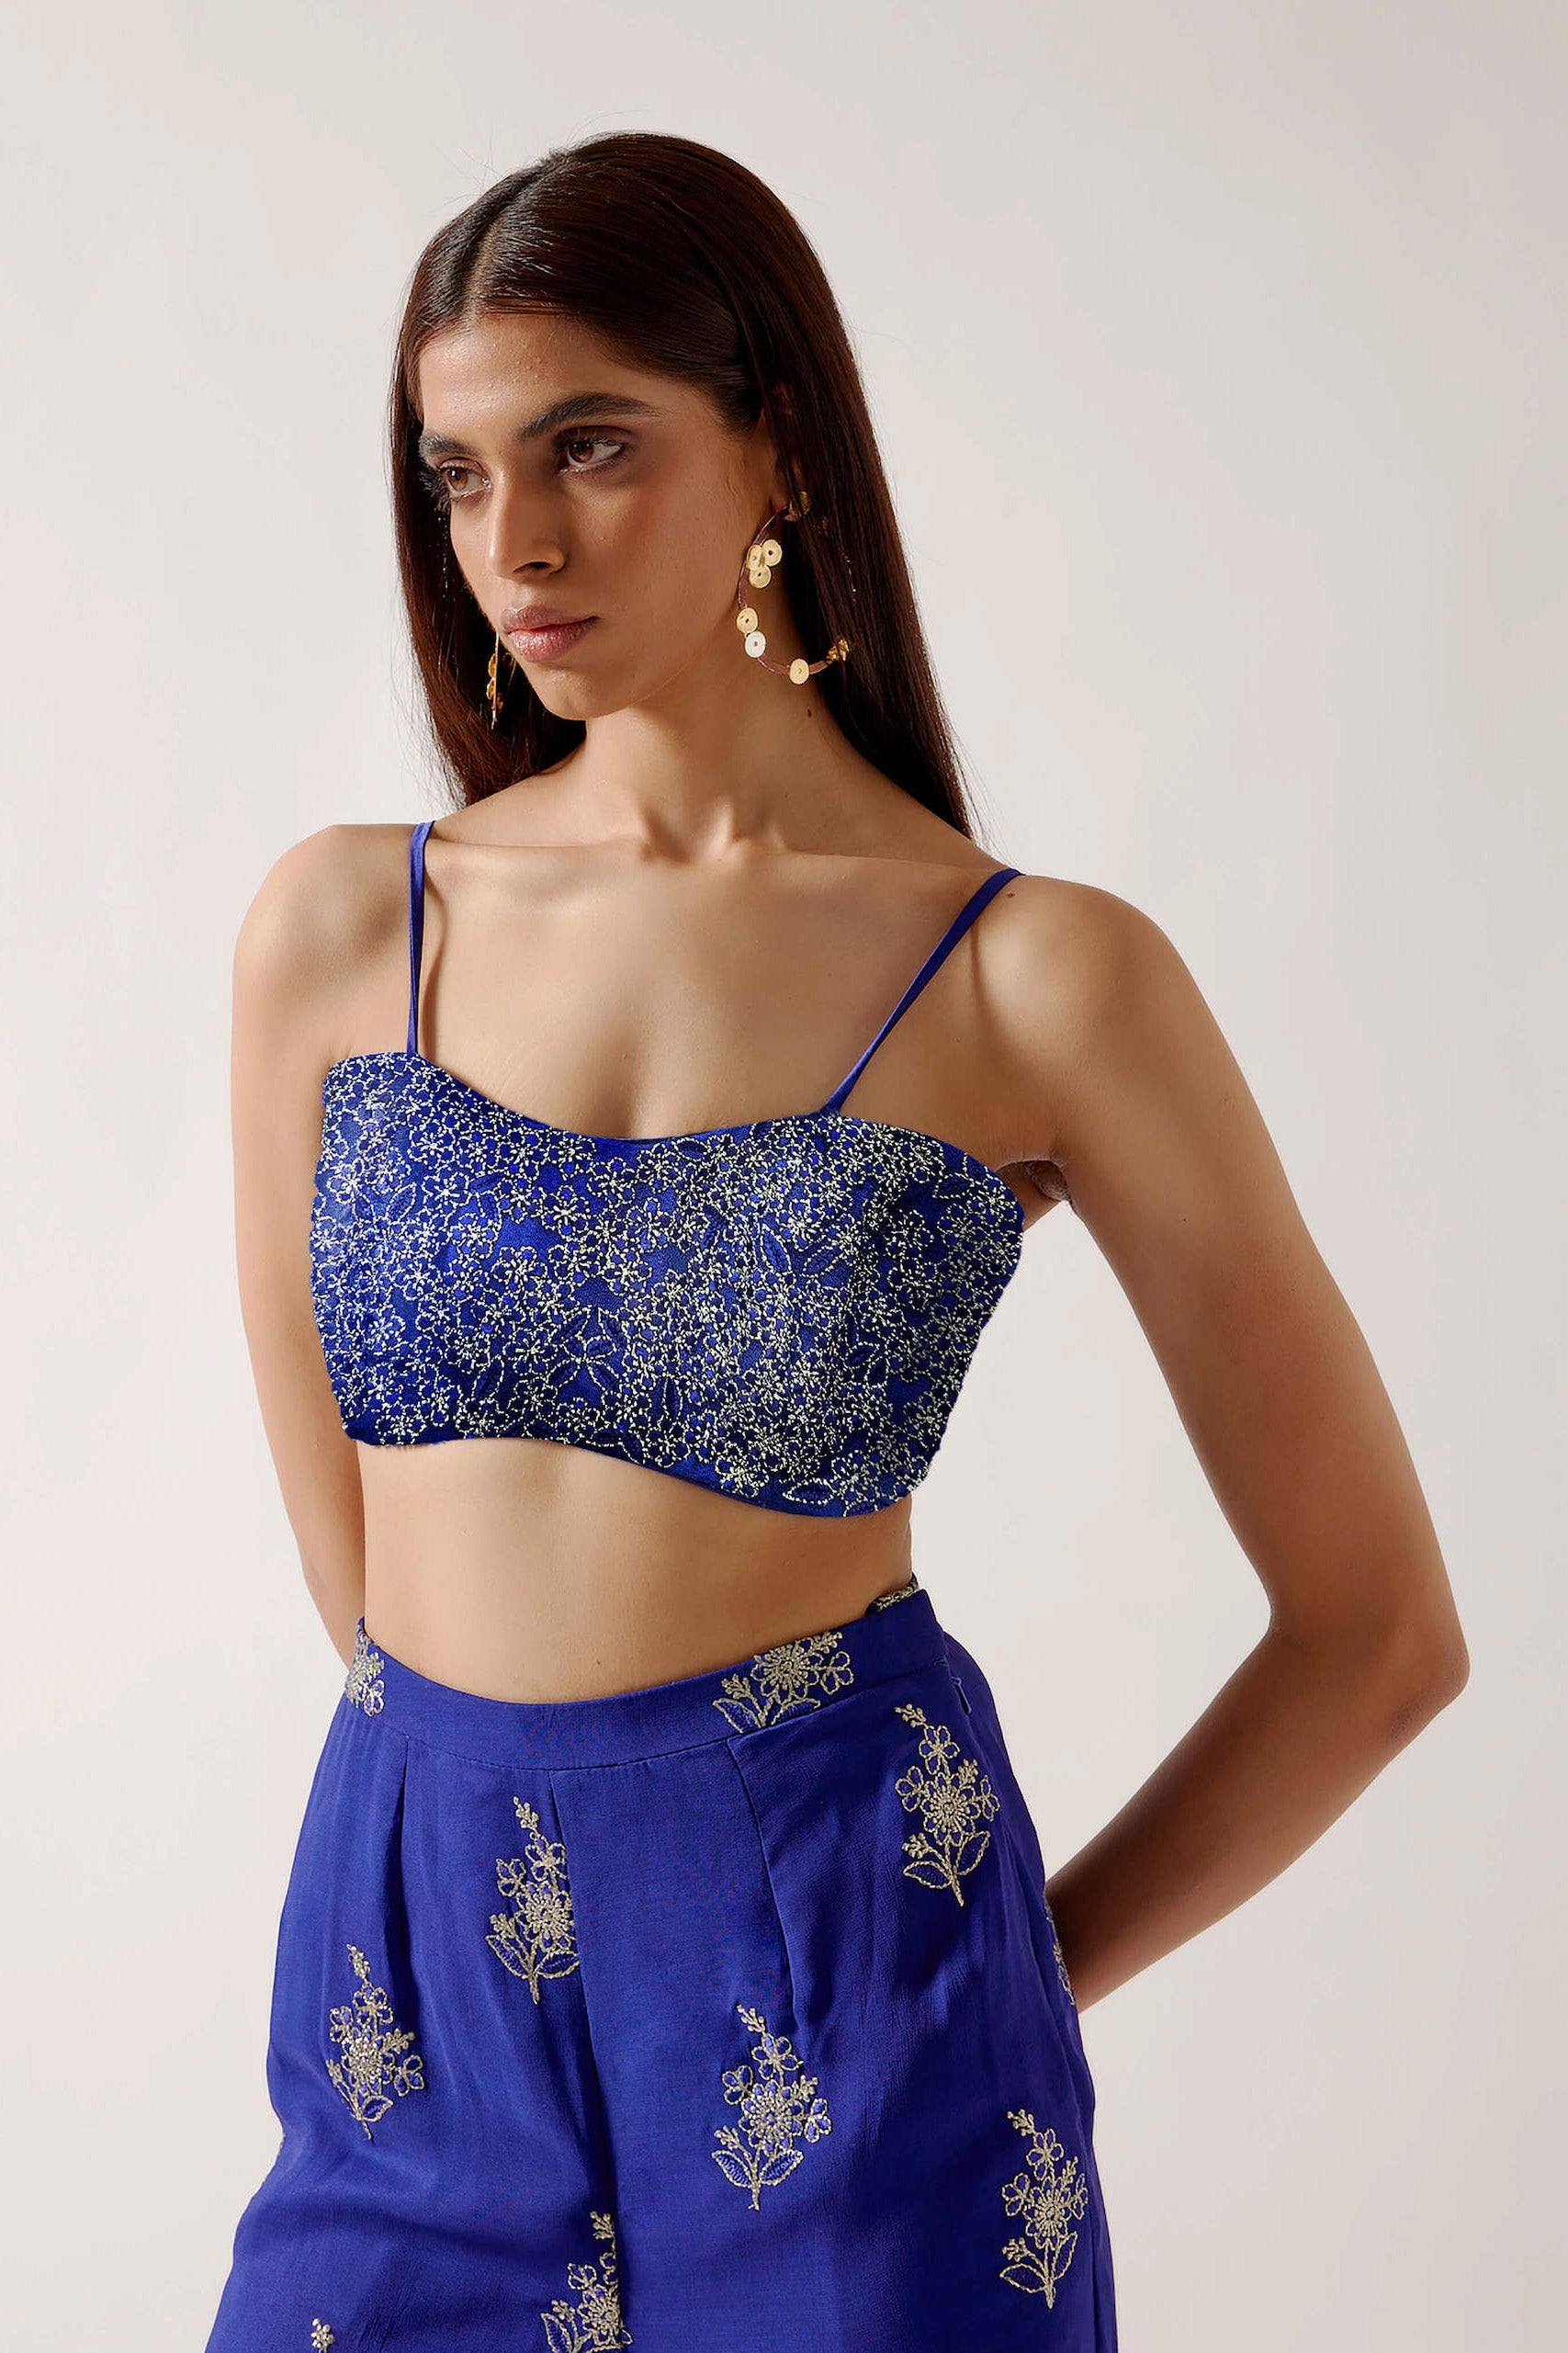 The embroidered Manali Set consists of a blue vest, bra top, and flared pants.